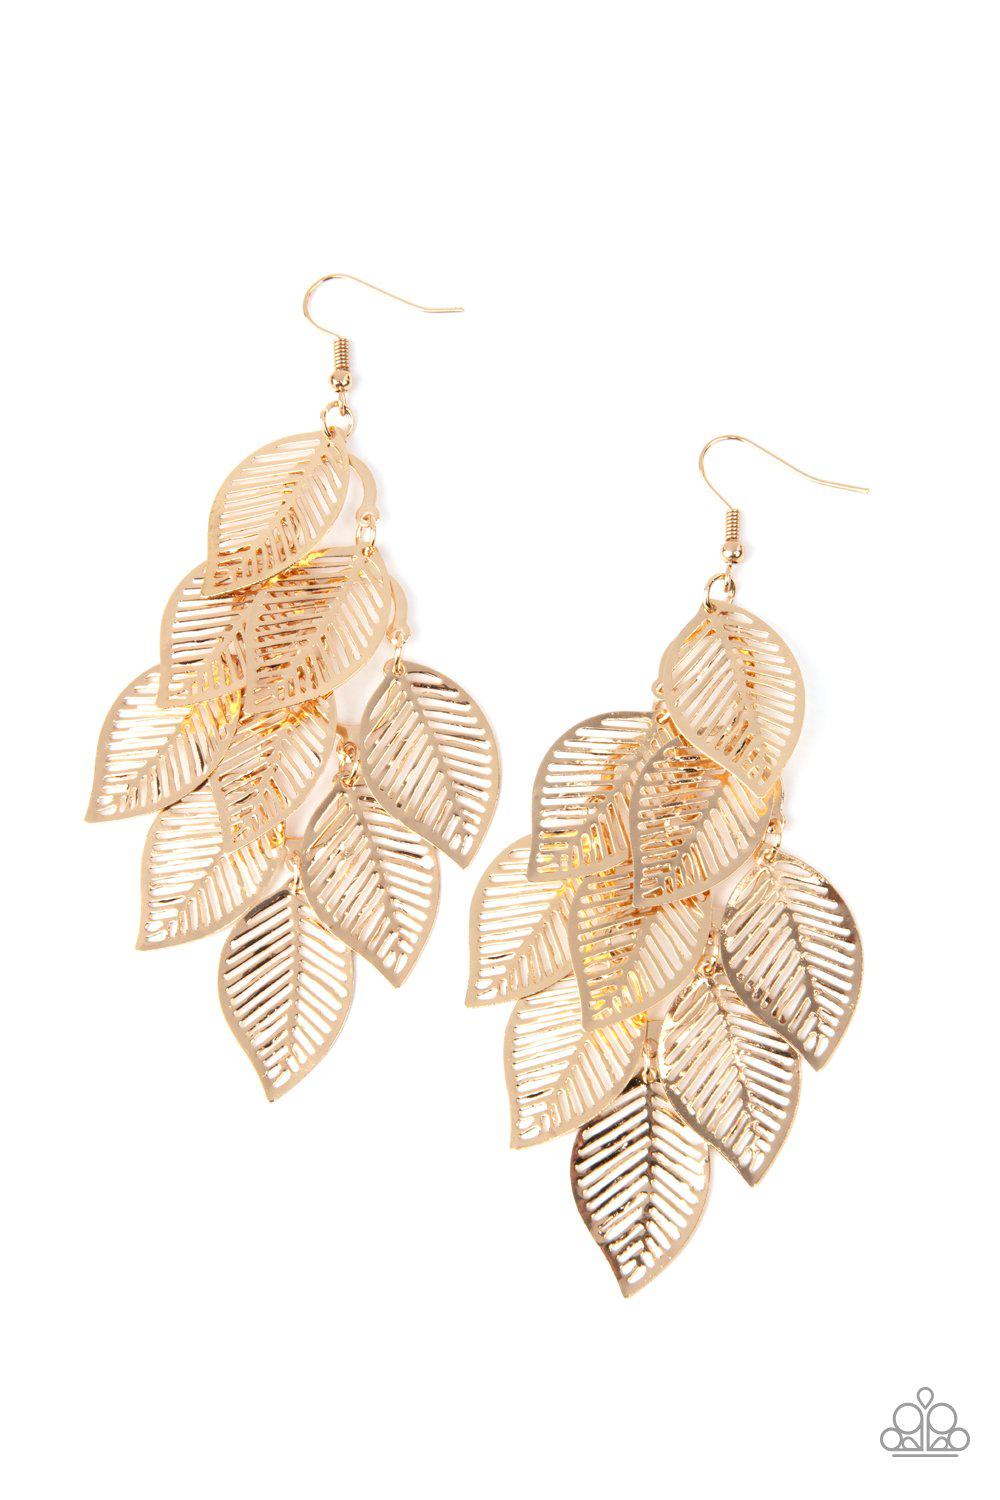 Limitlessly Leafy Gold Cascading Leaf Earrings - Paparazzi Accessories- lightbox - CarasShop.com - $5 Jewelry by Cara Jewels